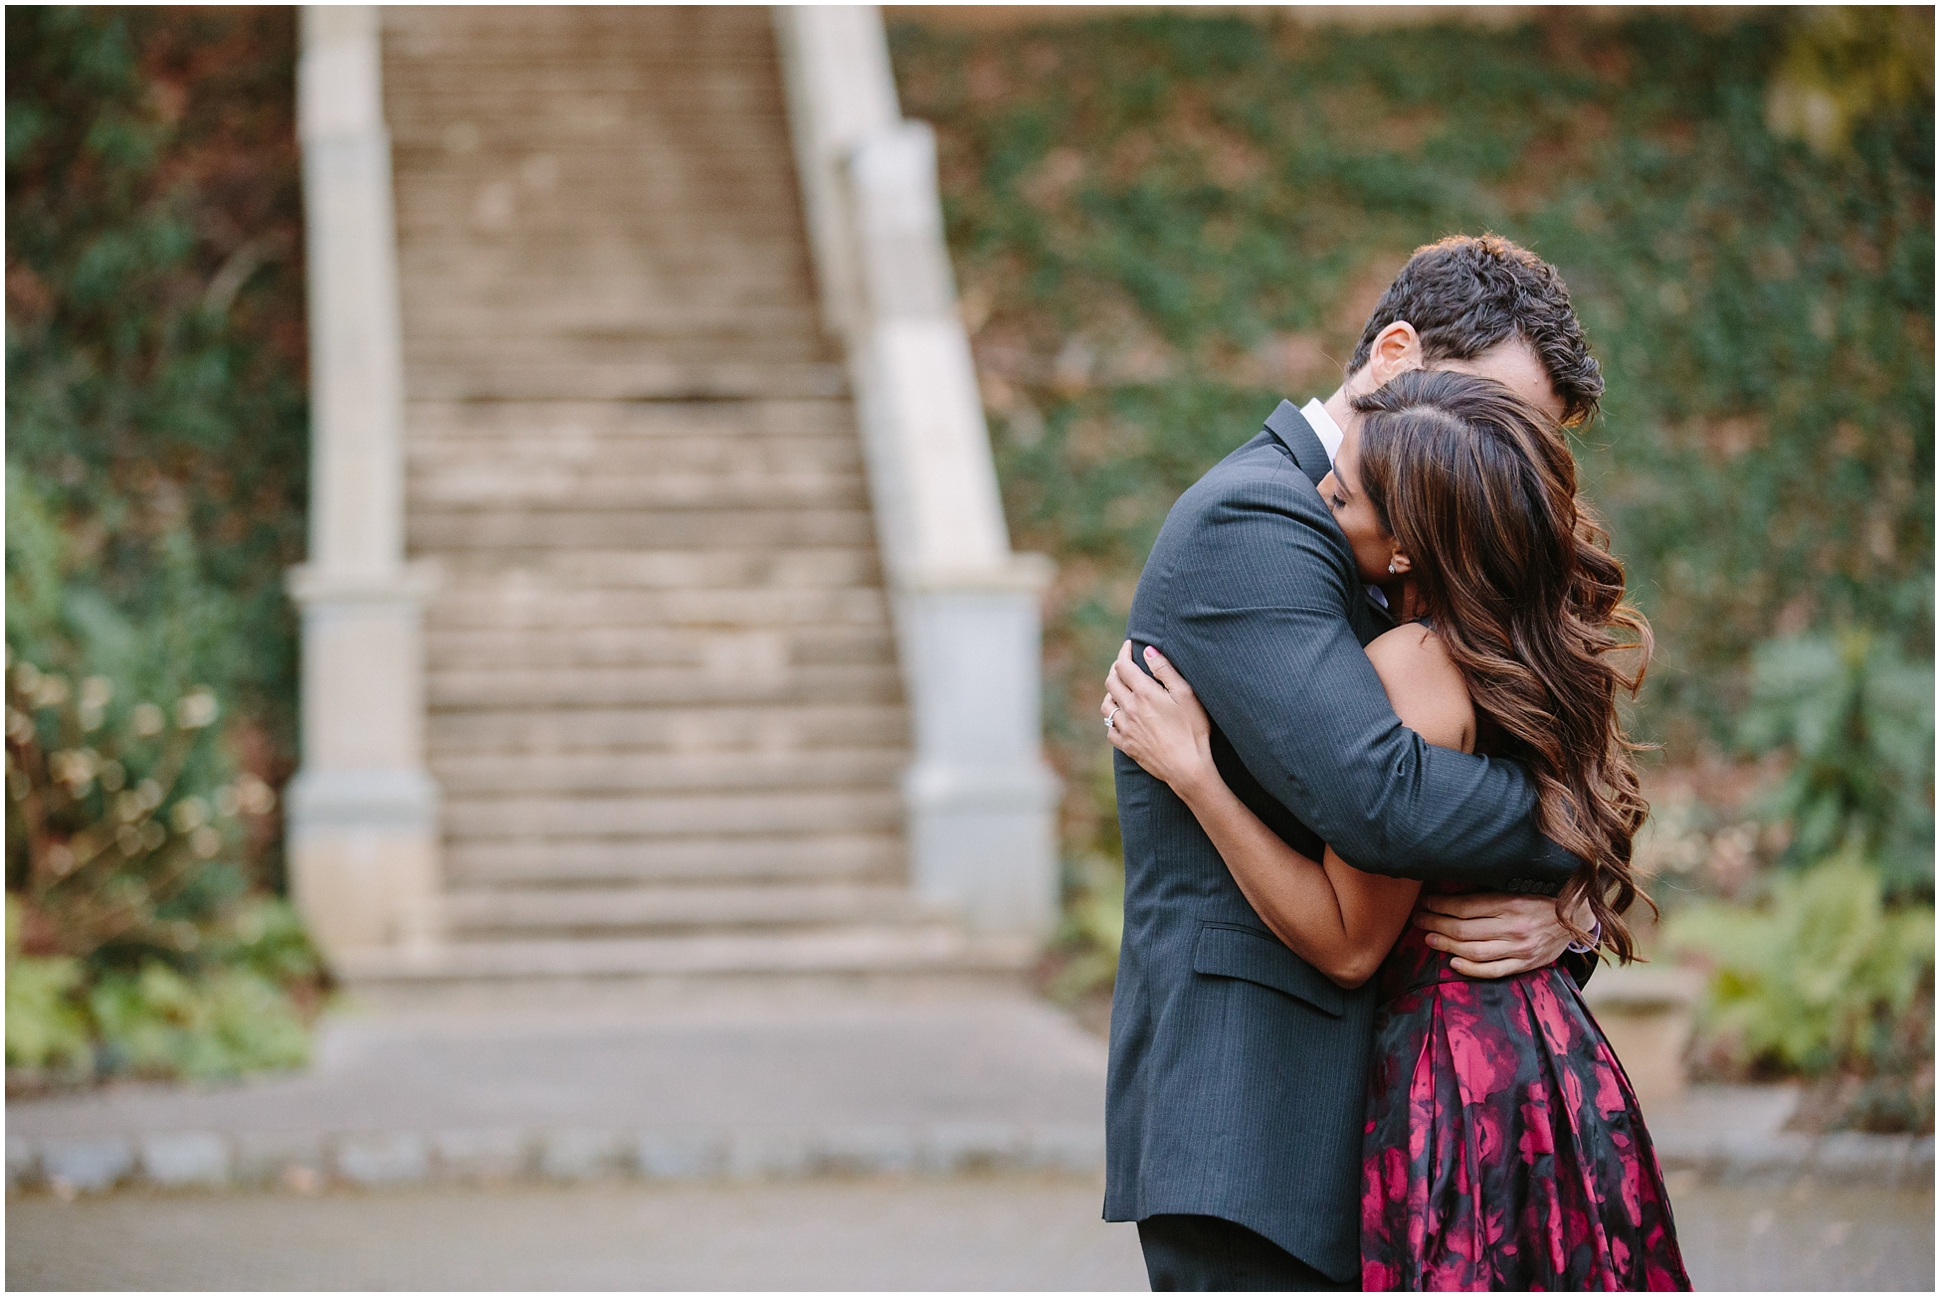 A Romantic Cator Woolford Engagement Session | Atlanta, Georgia Wedding Photographers | Two Chics Photography | www.twochicsphotography.com